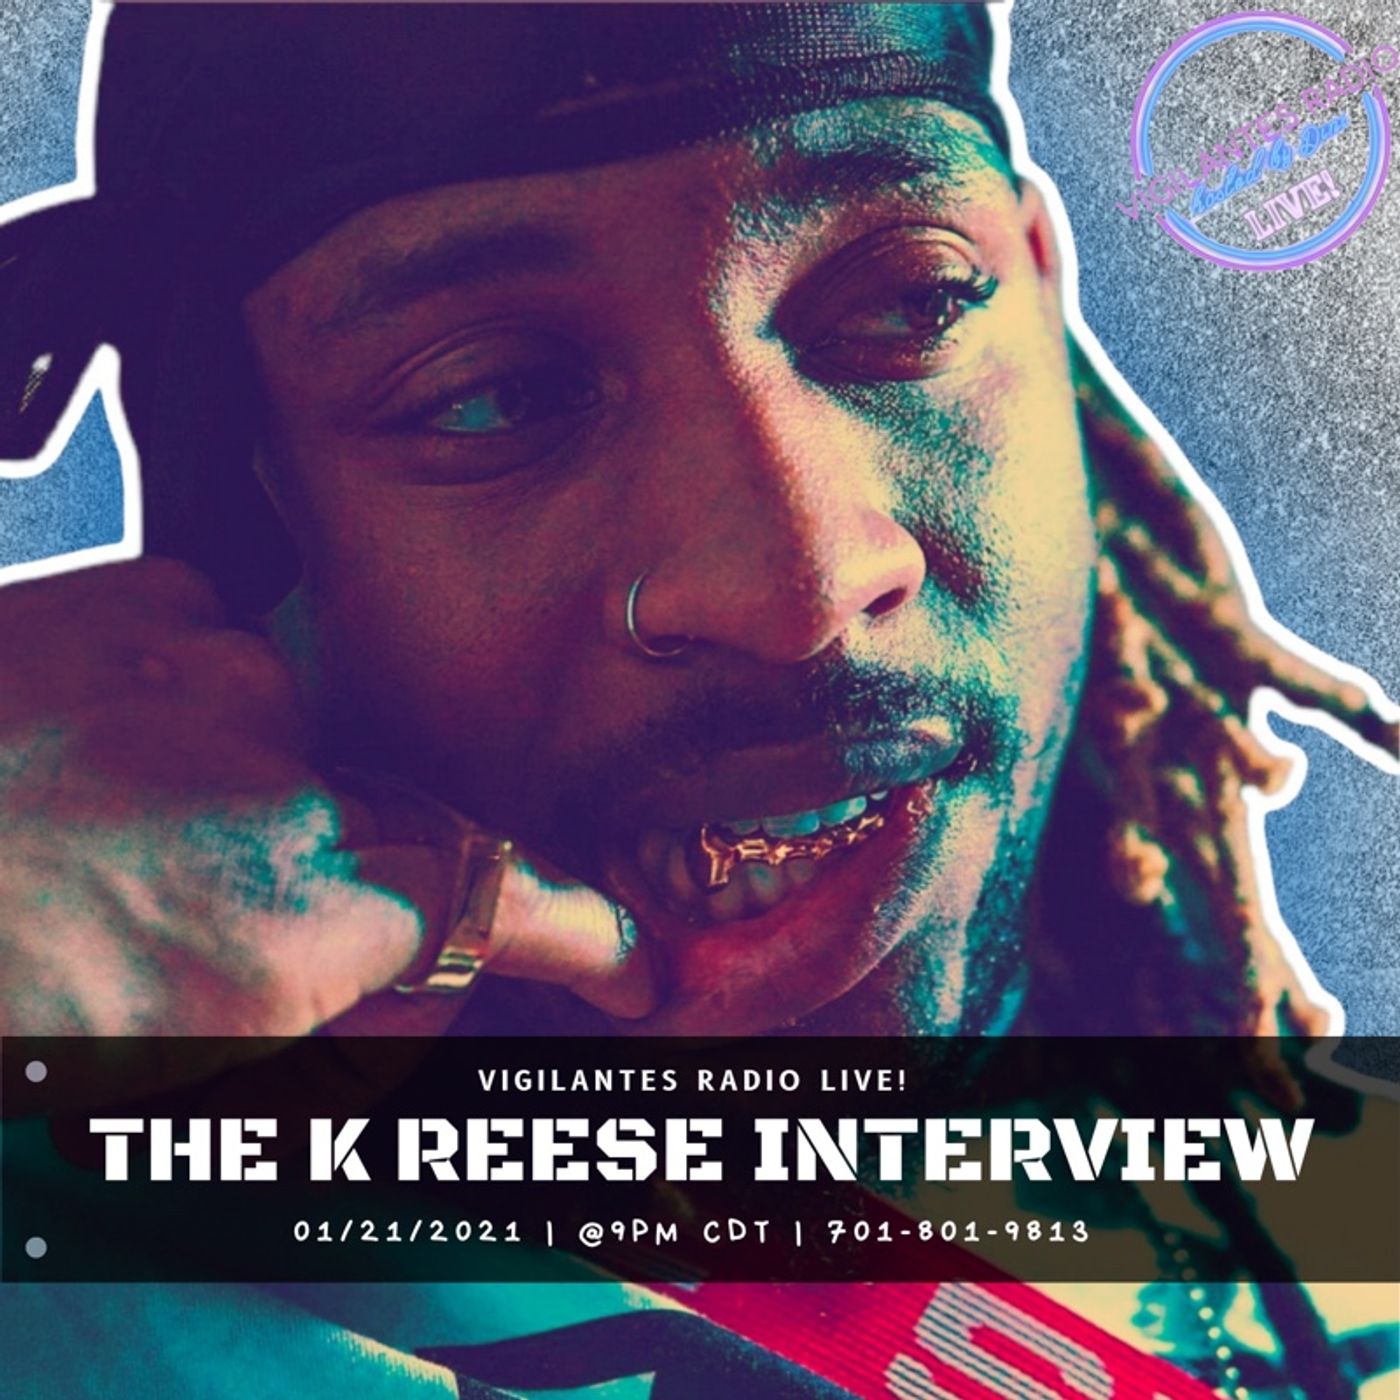 The K Reese Interview. Image